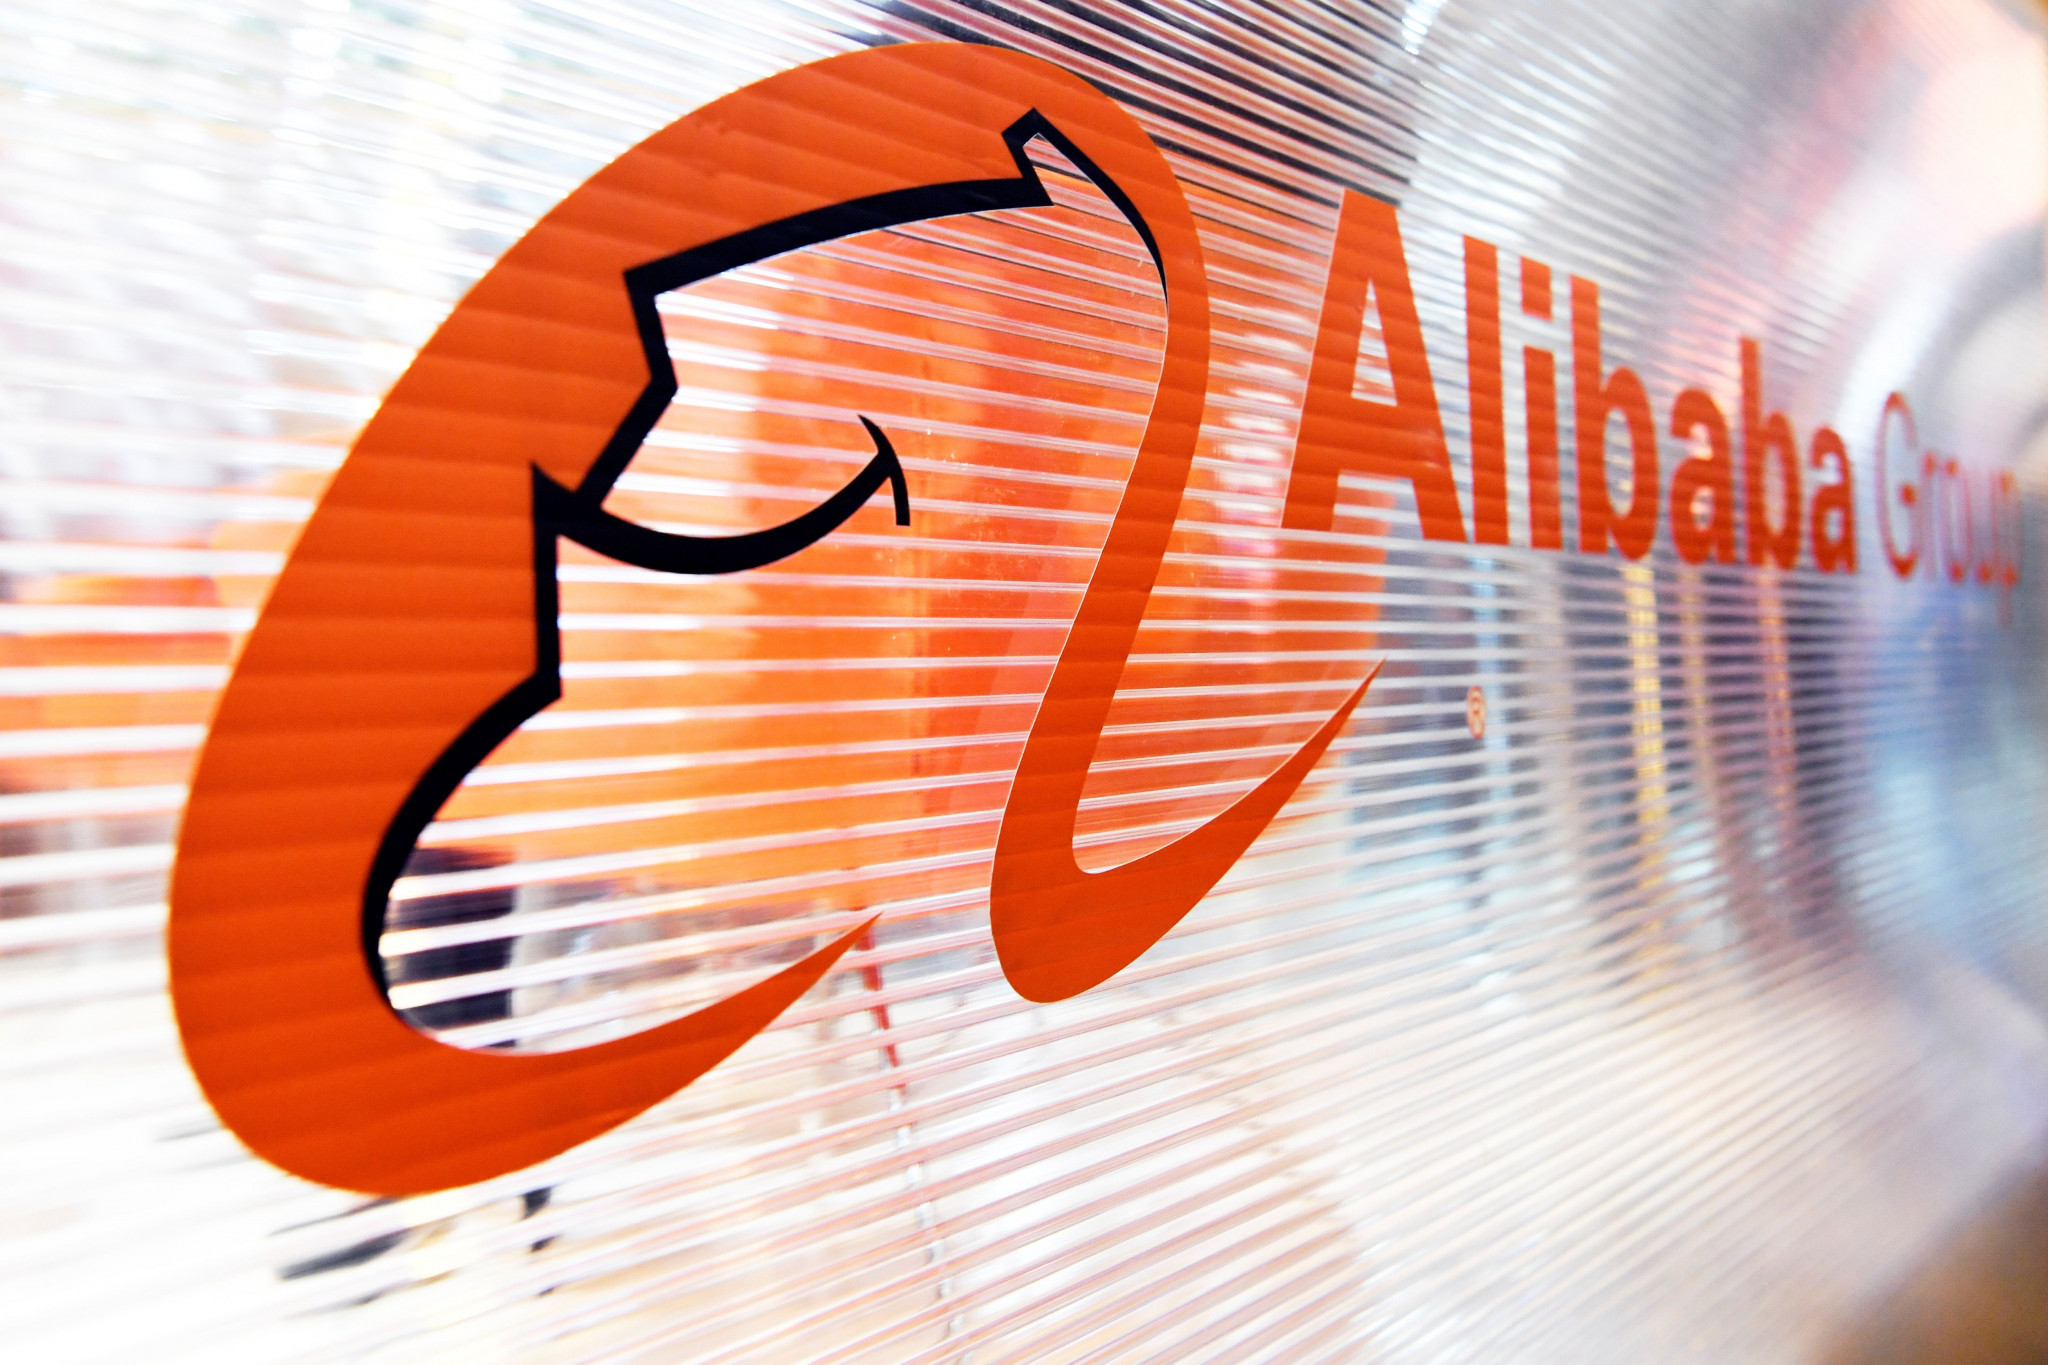 Chinese TOP sponsor Alibaba will be involved at the facility ©Getty Images